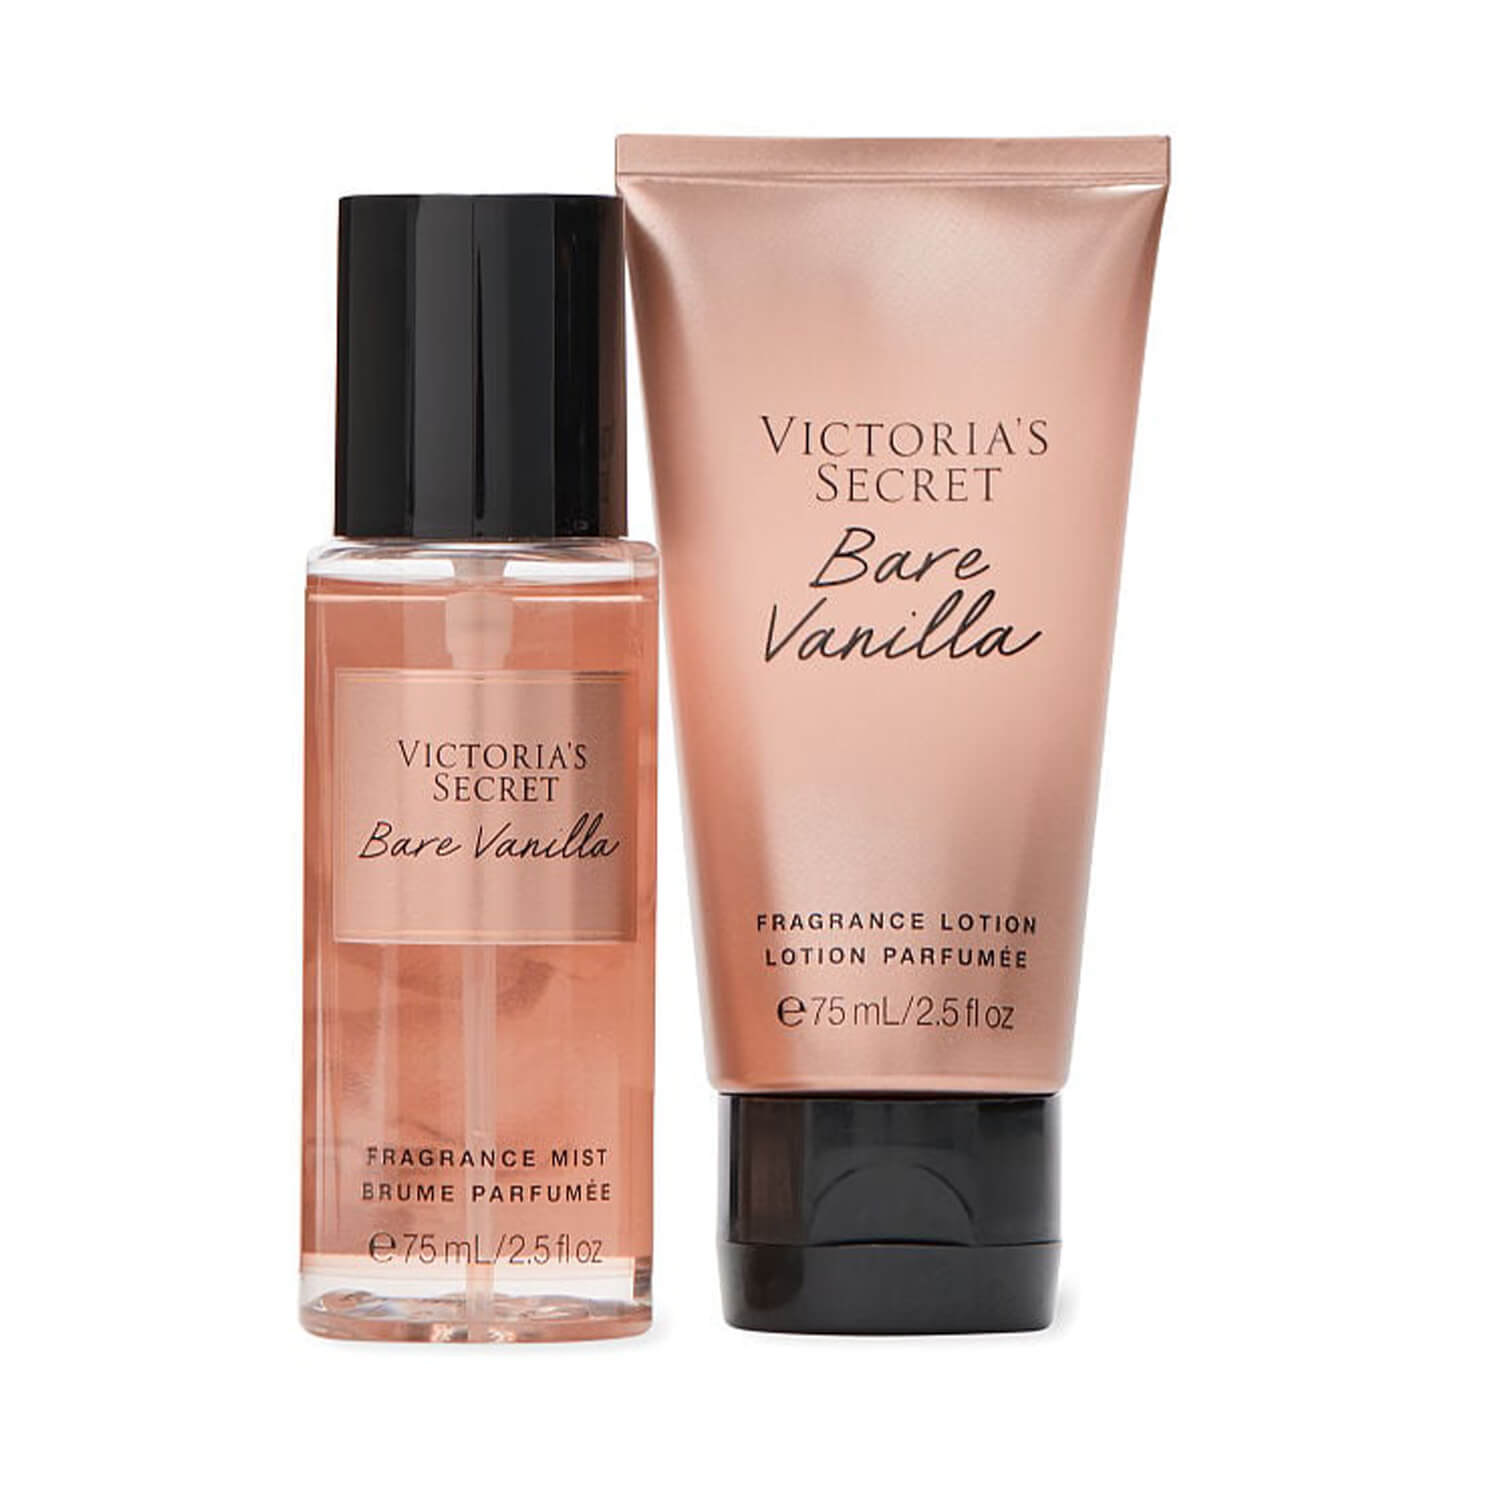 shop Victoria's Secret mist and lotion mini bare vanilla set available at Heygirl.pk for delivery in Pakistan